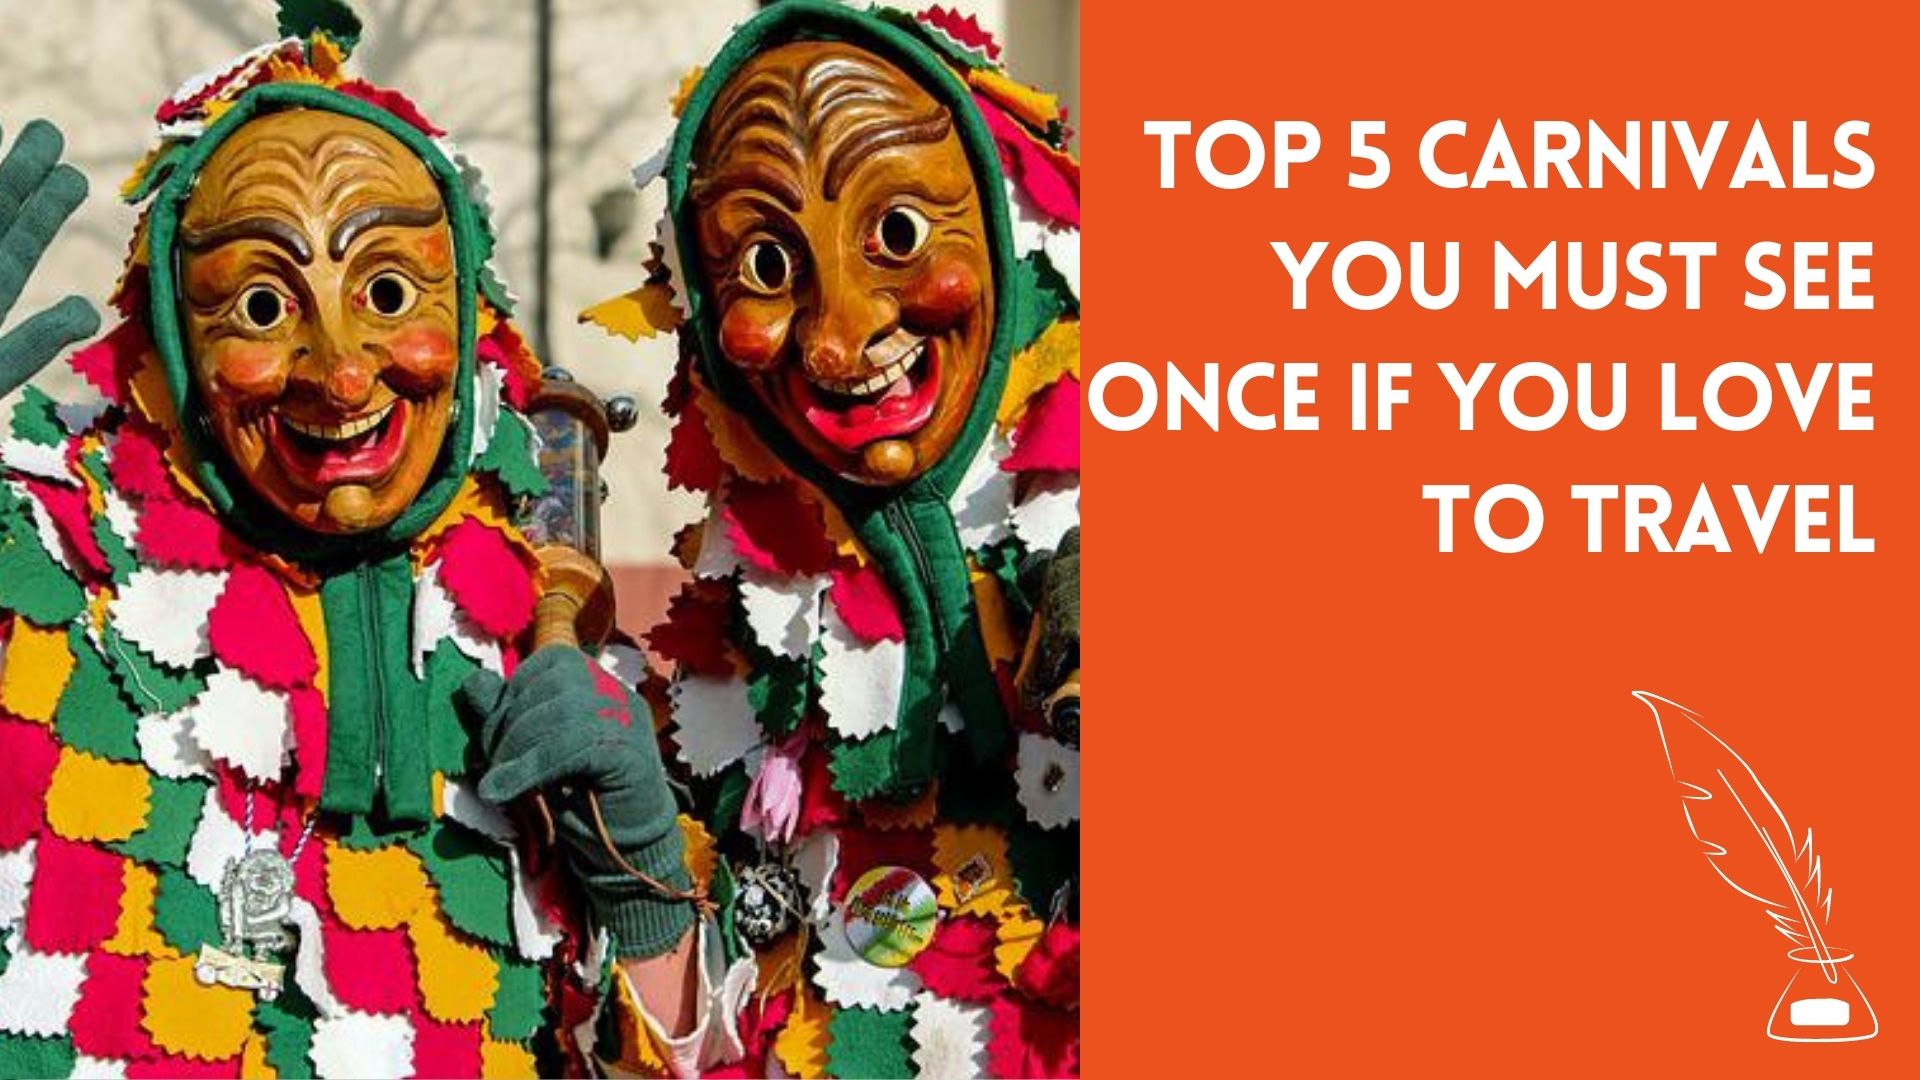 Top 5 Carnivals You Must See Once If You Love To Travel